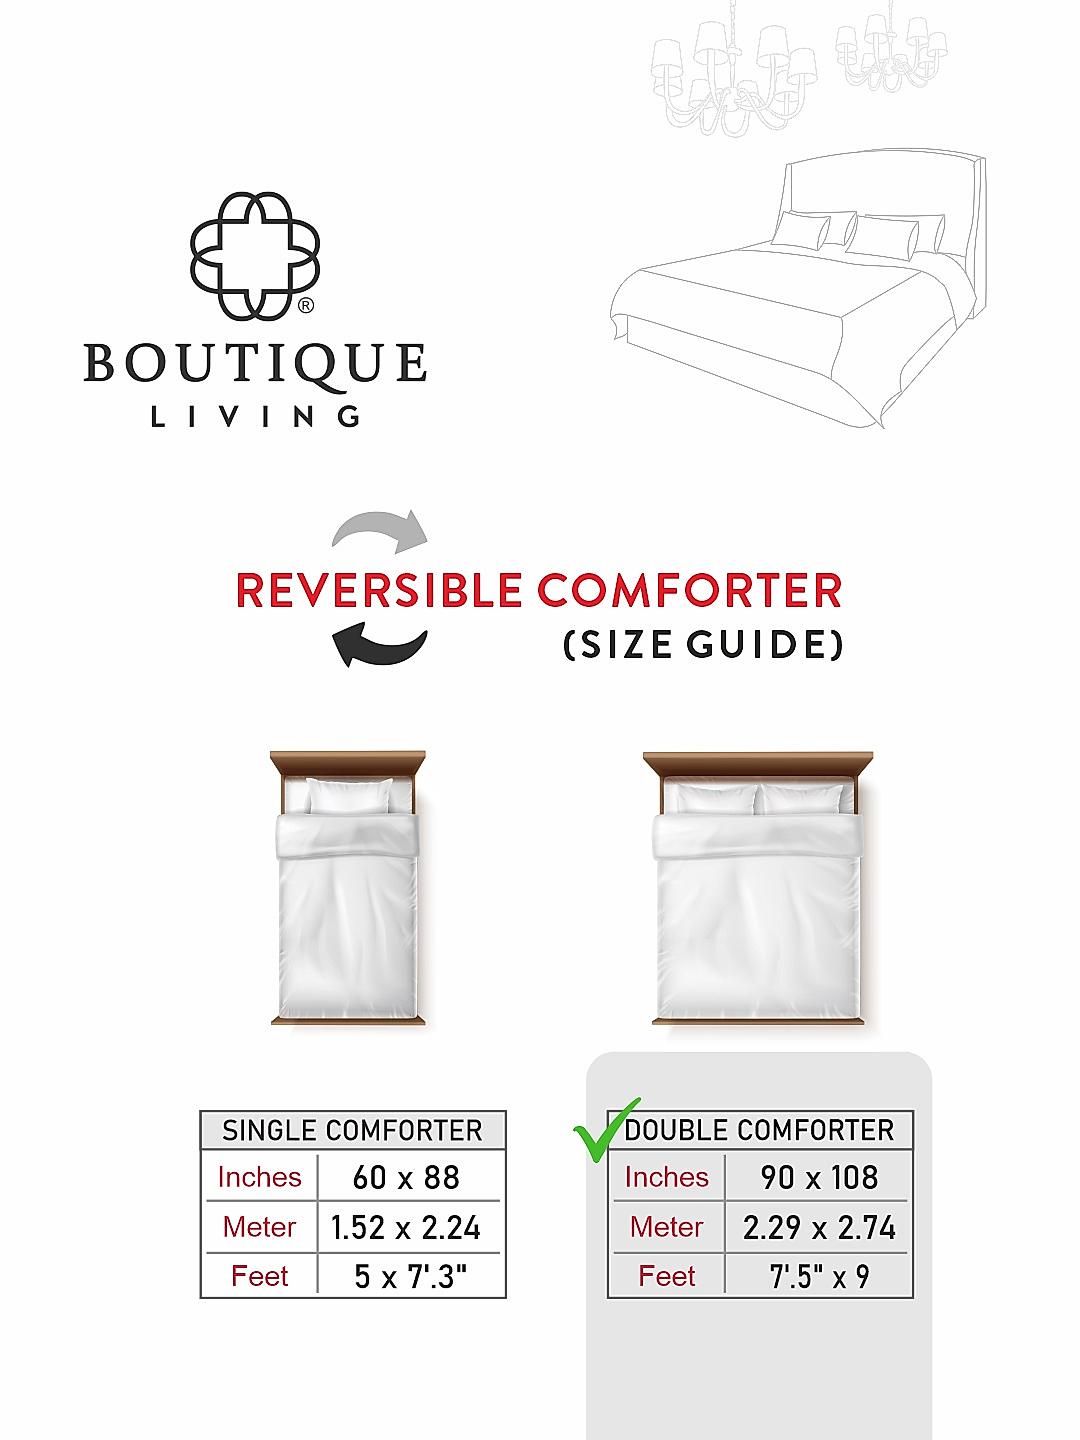 Comforter Size Guide